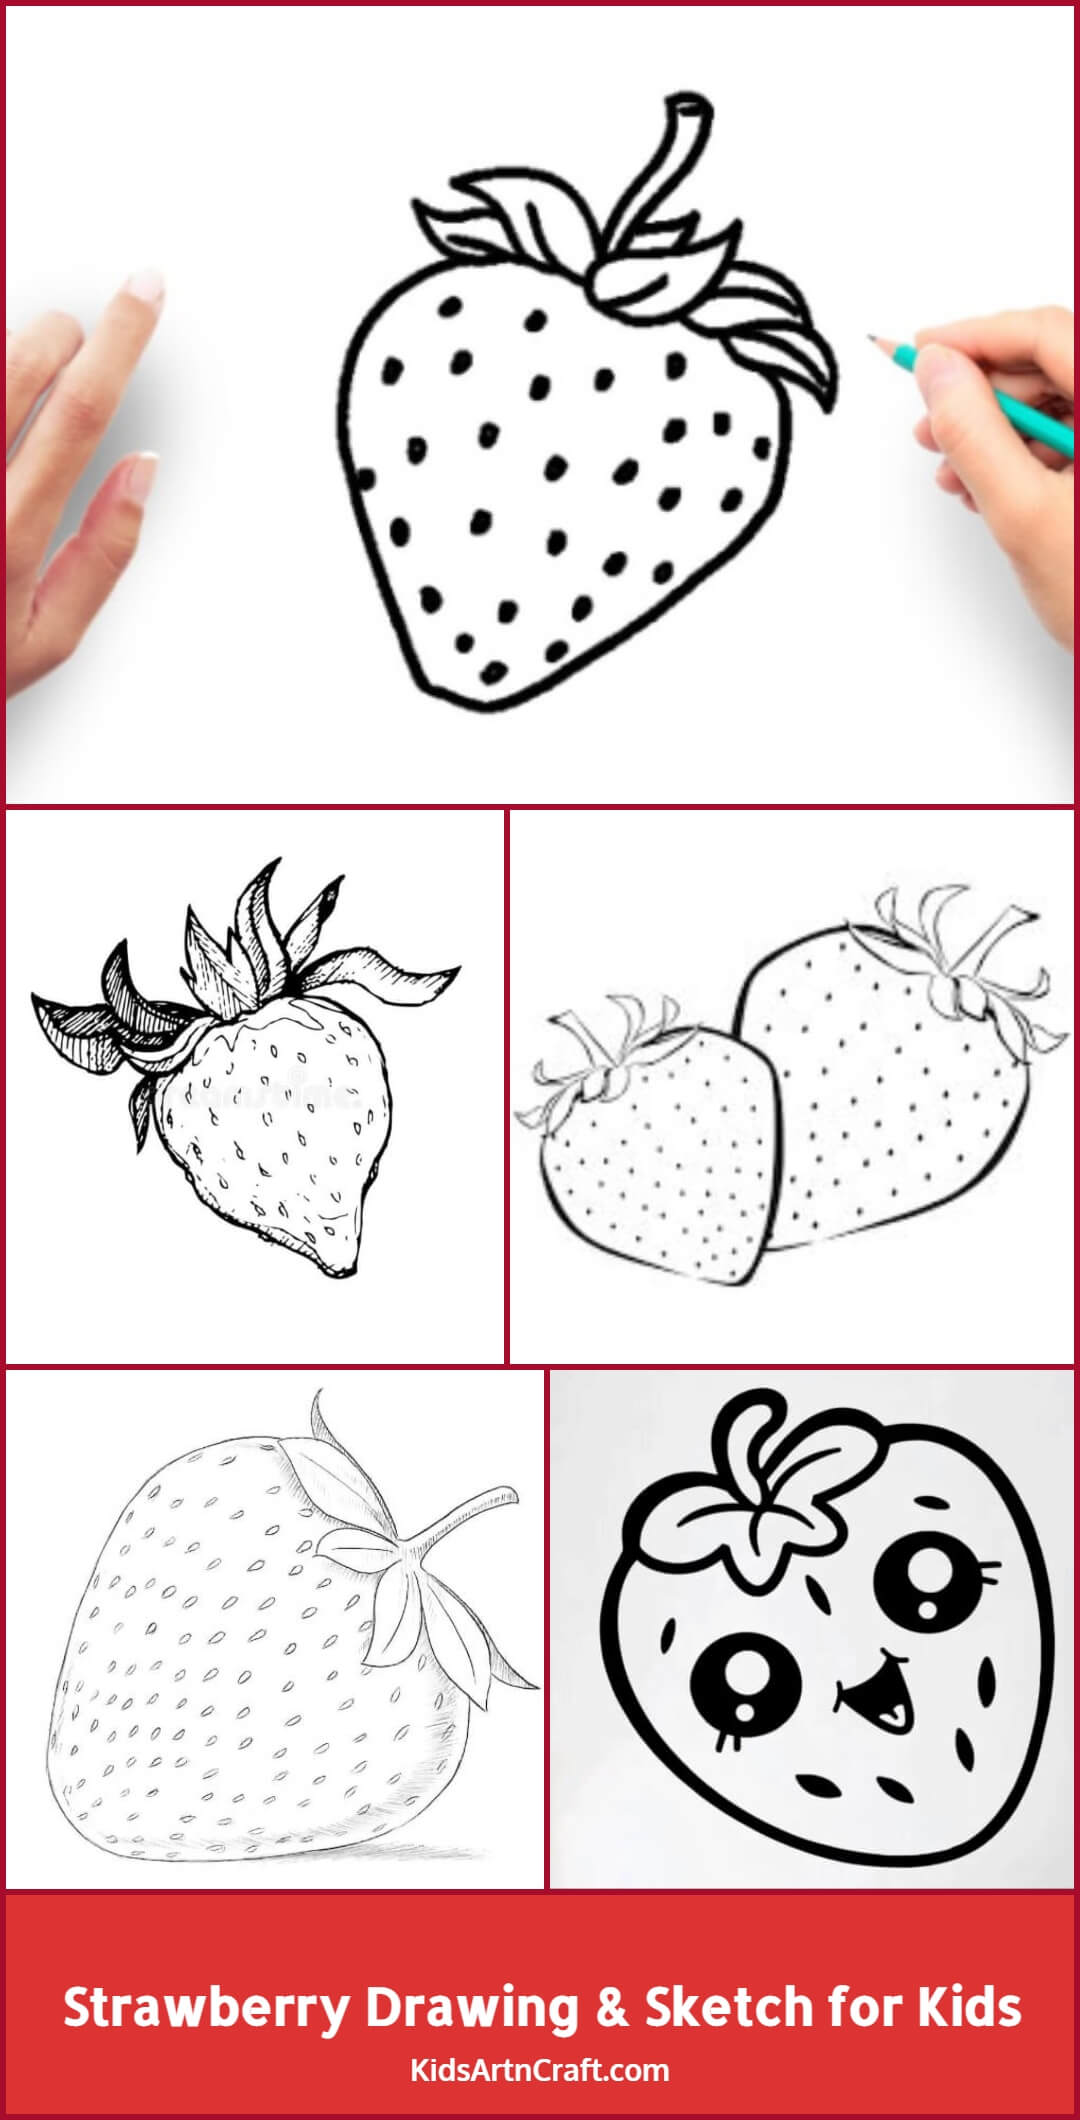 Strawberry Drawing & Sketch for Kids